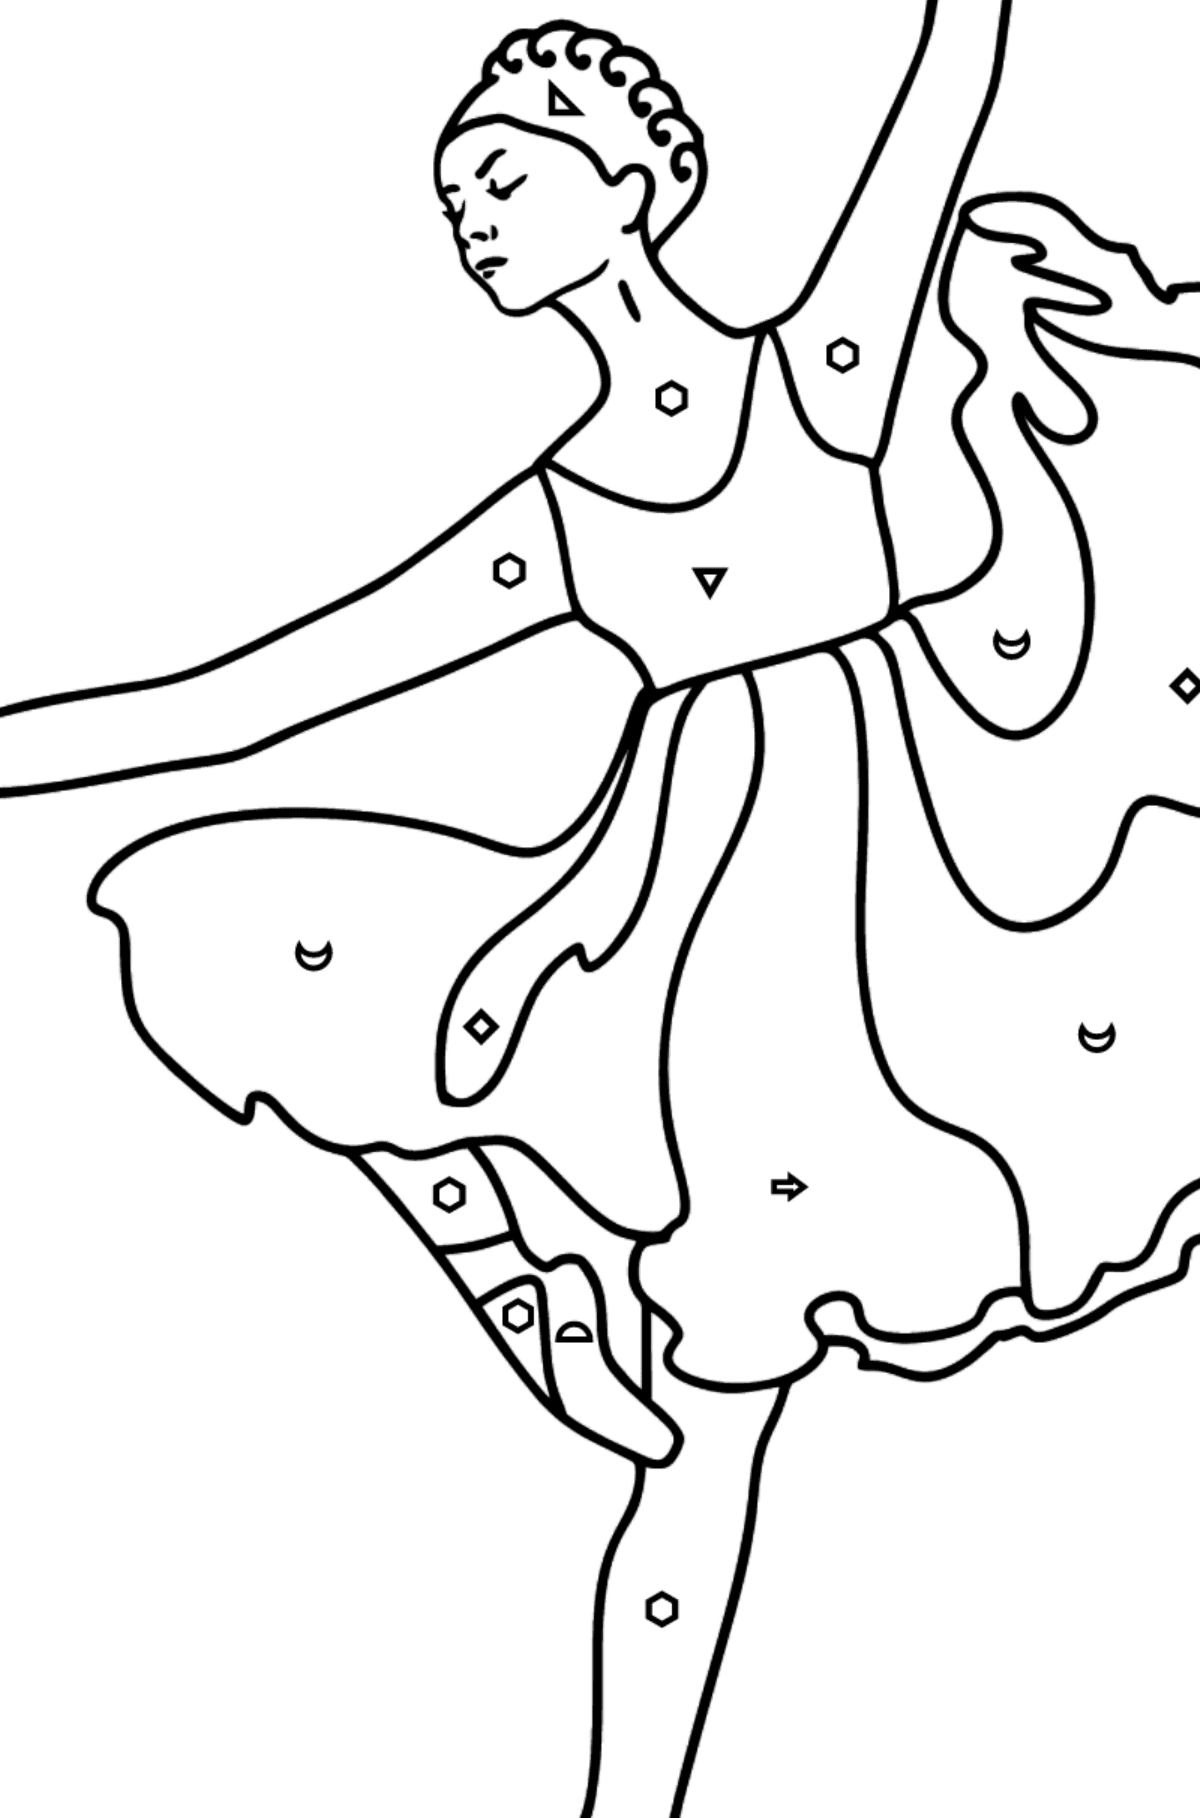 Ballerina in Lilac Dress coloring page - Coloring by Symbols and Geometric Shapes for Kids